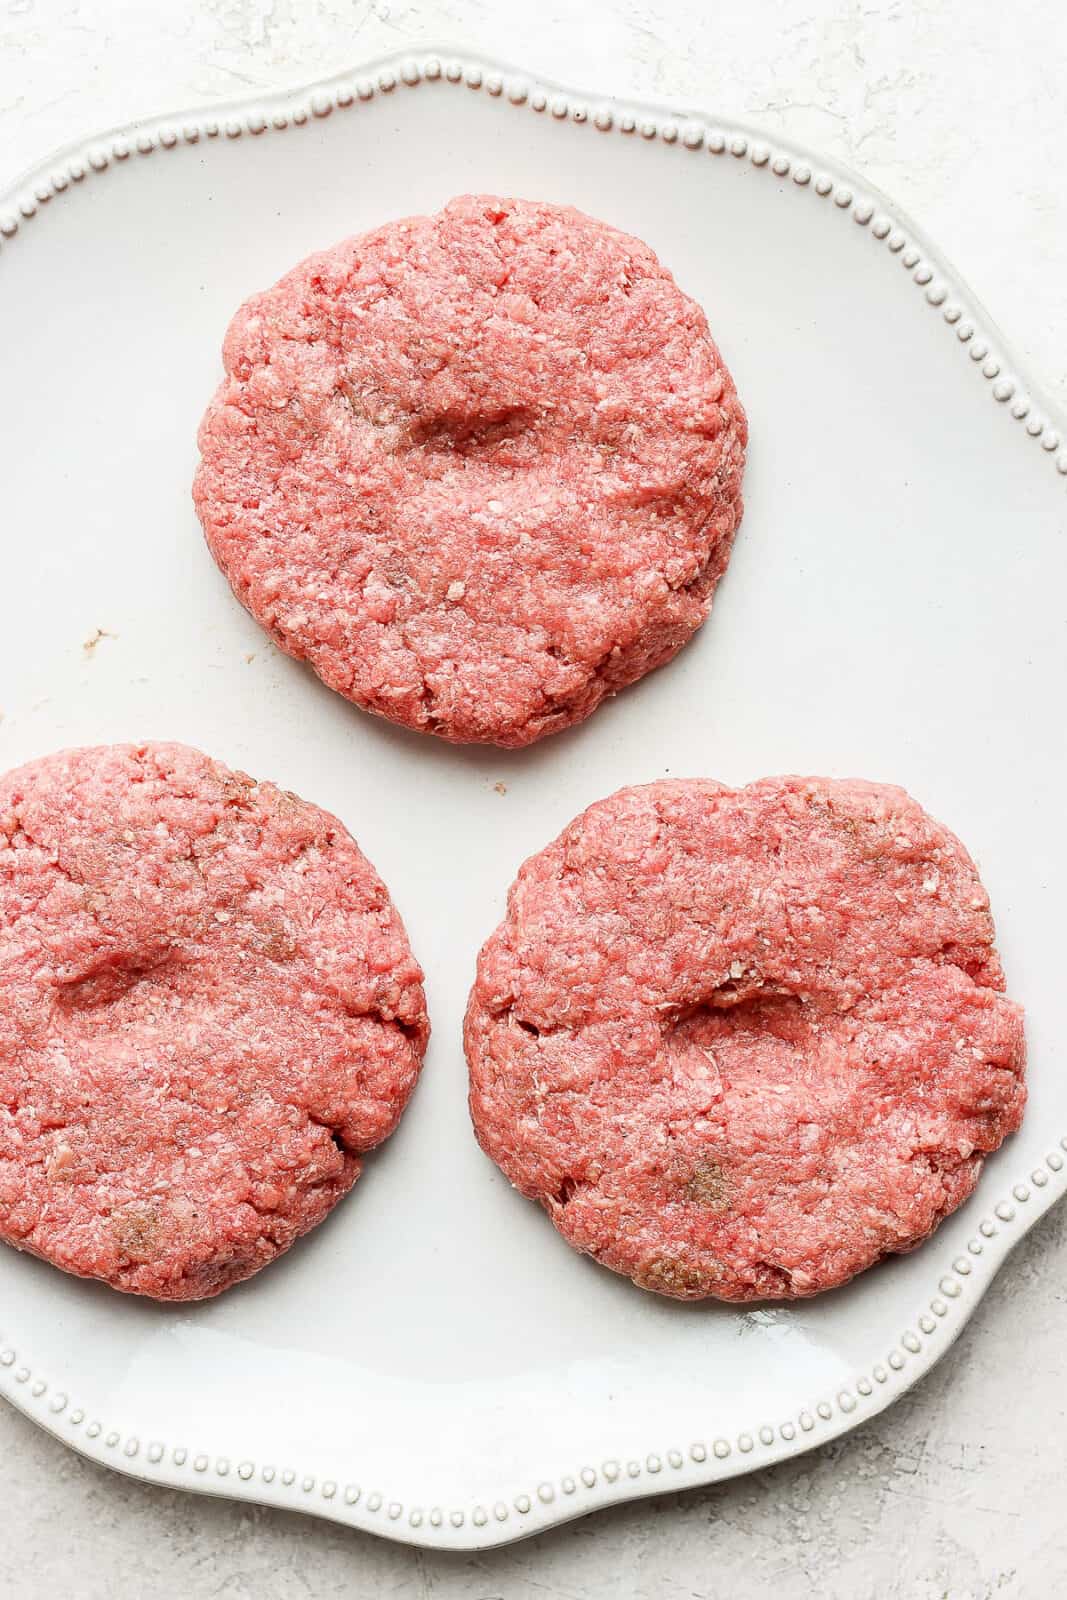 Three hamburger patties on a plate with thumbprints in the middle.